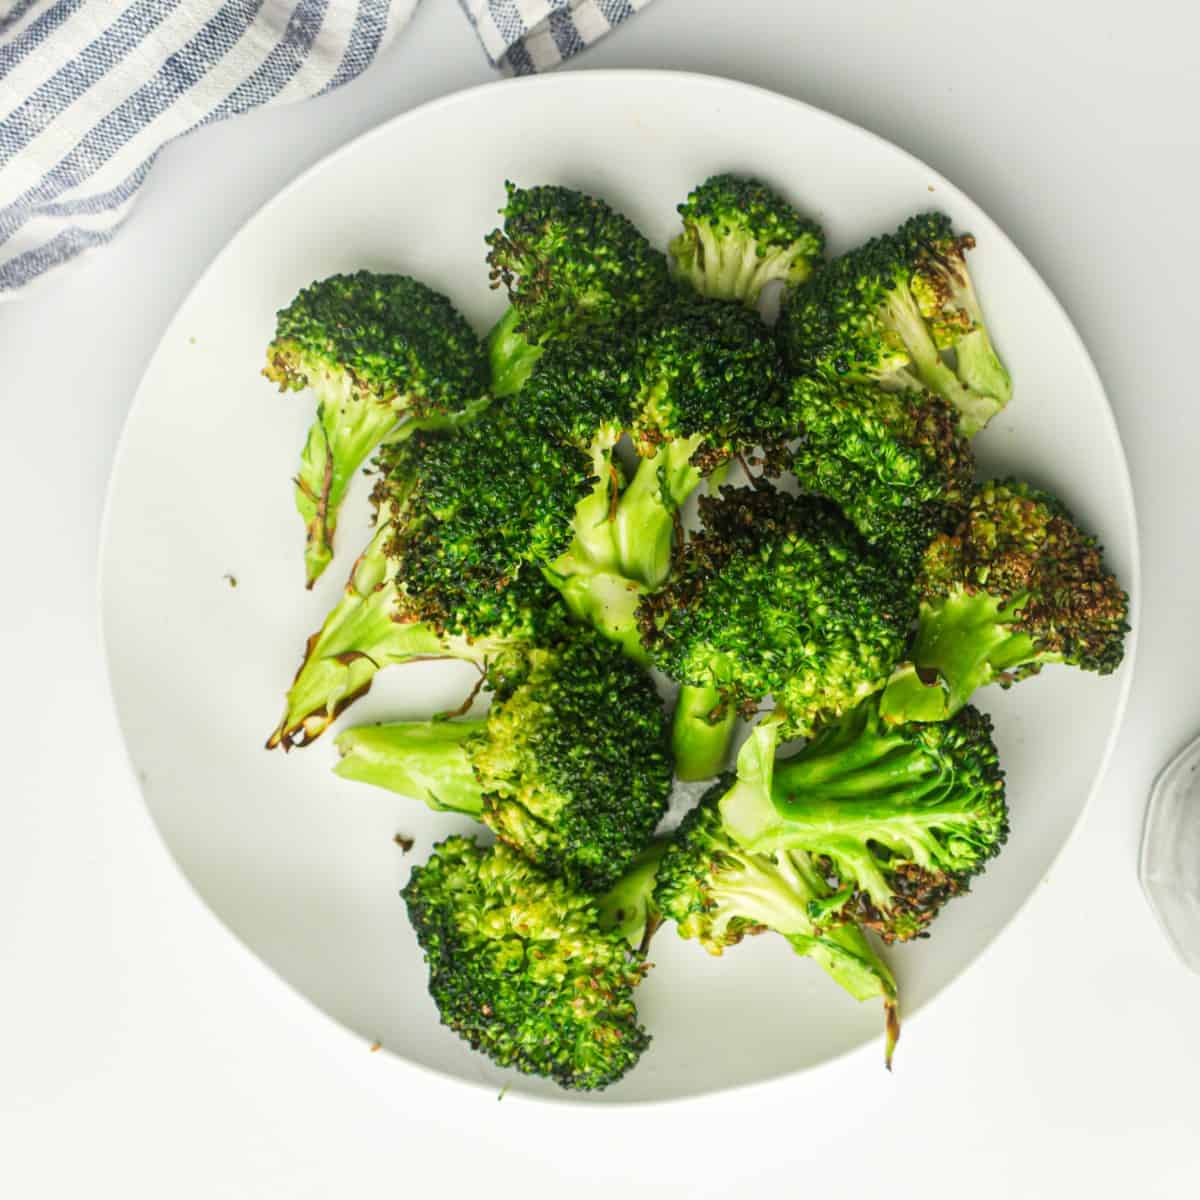 A white plate heaped with air fryer frozen broccoli florets. The broccoli is green with slightly crispy tips